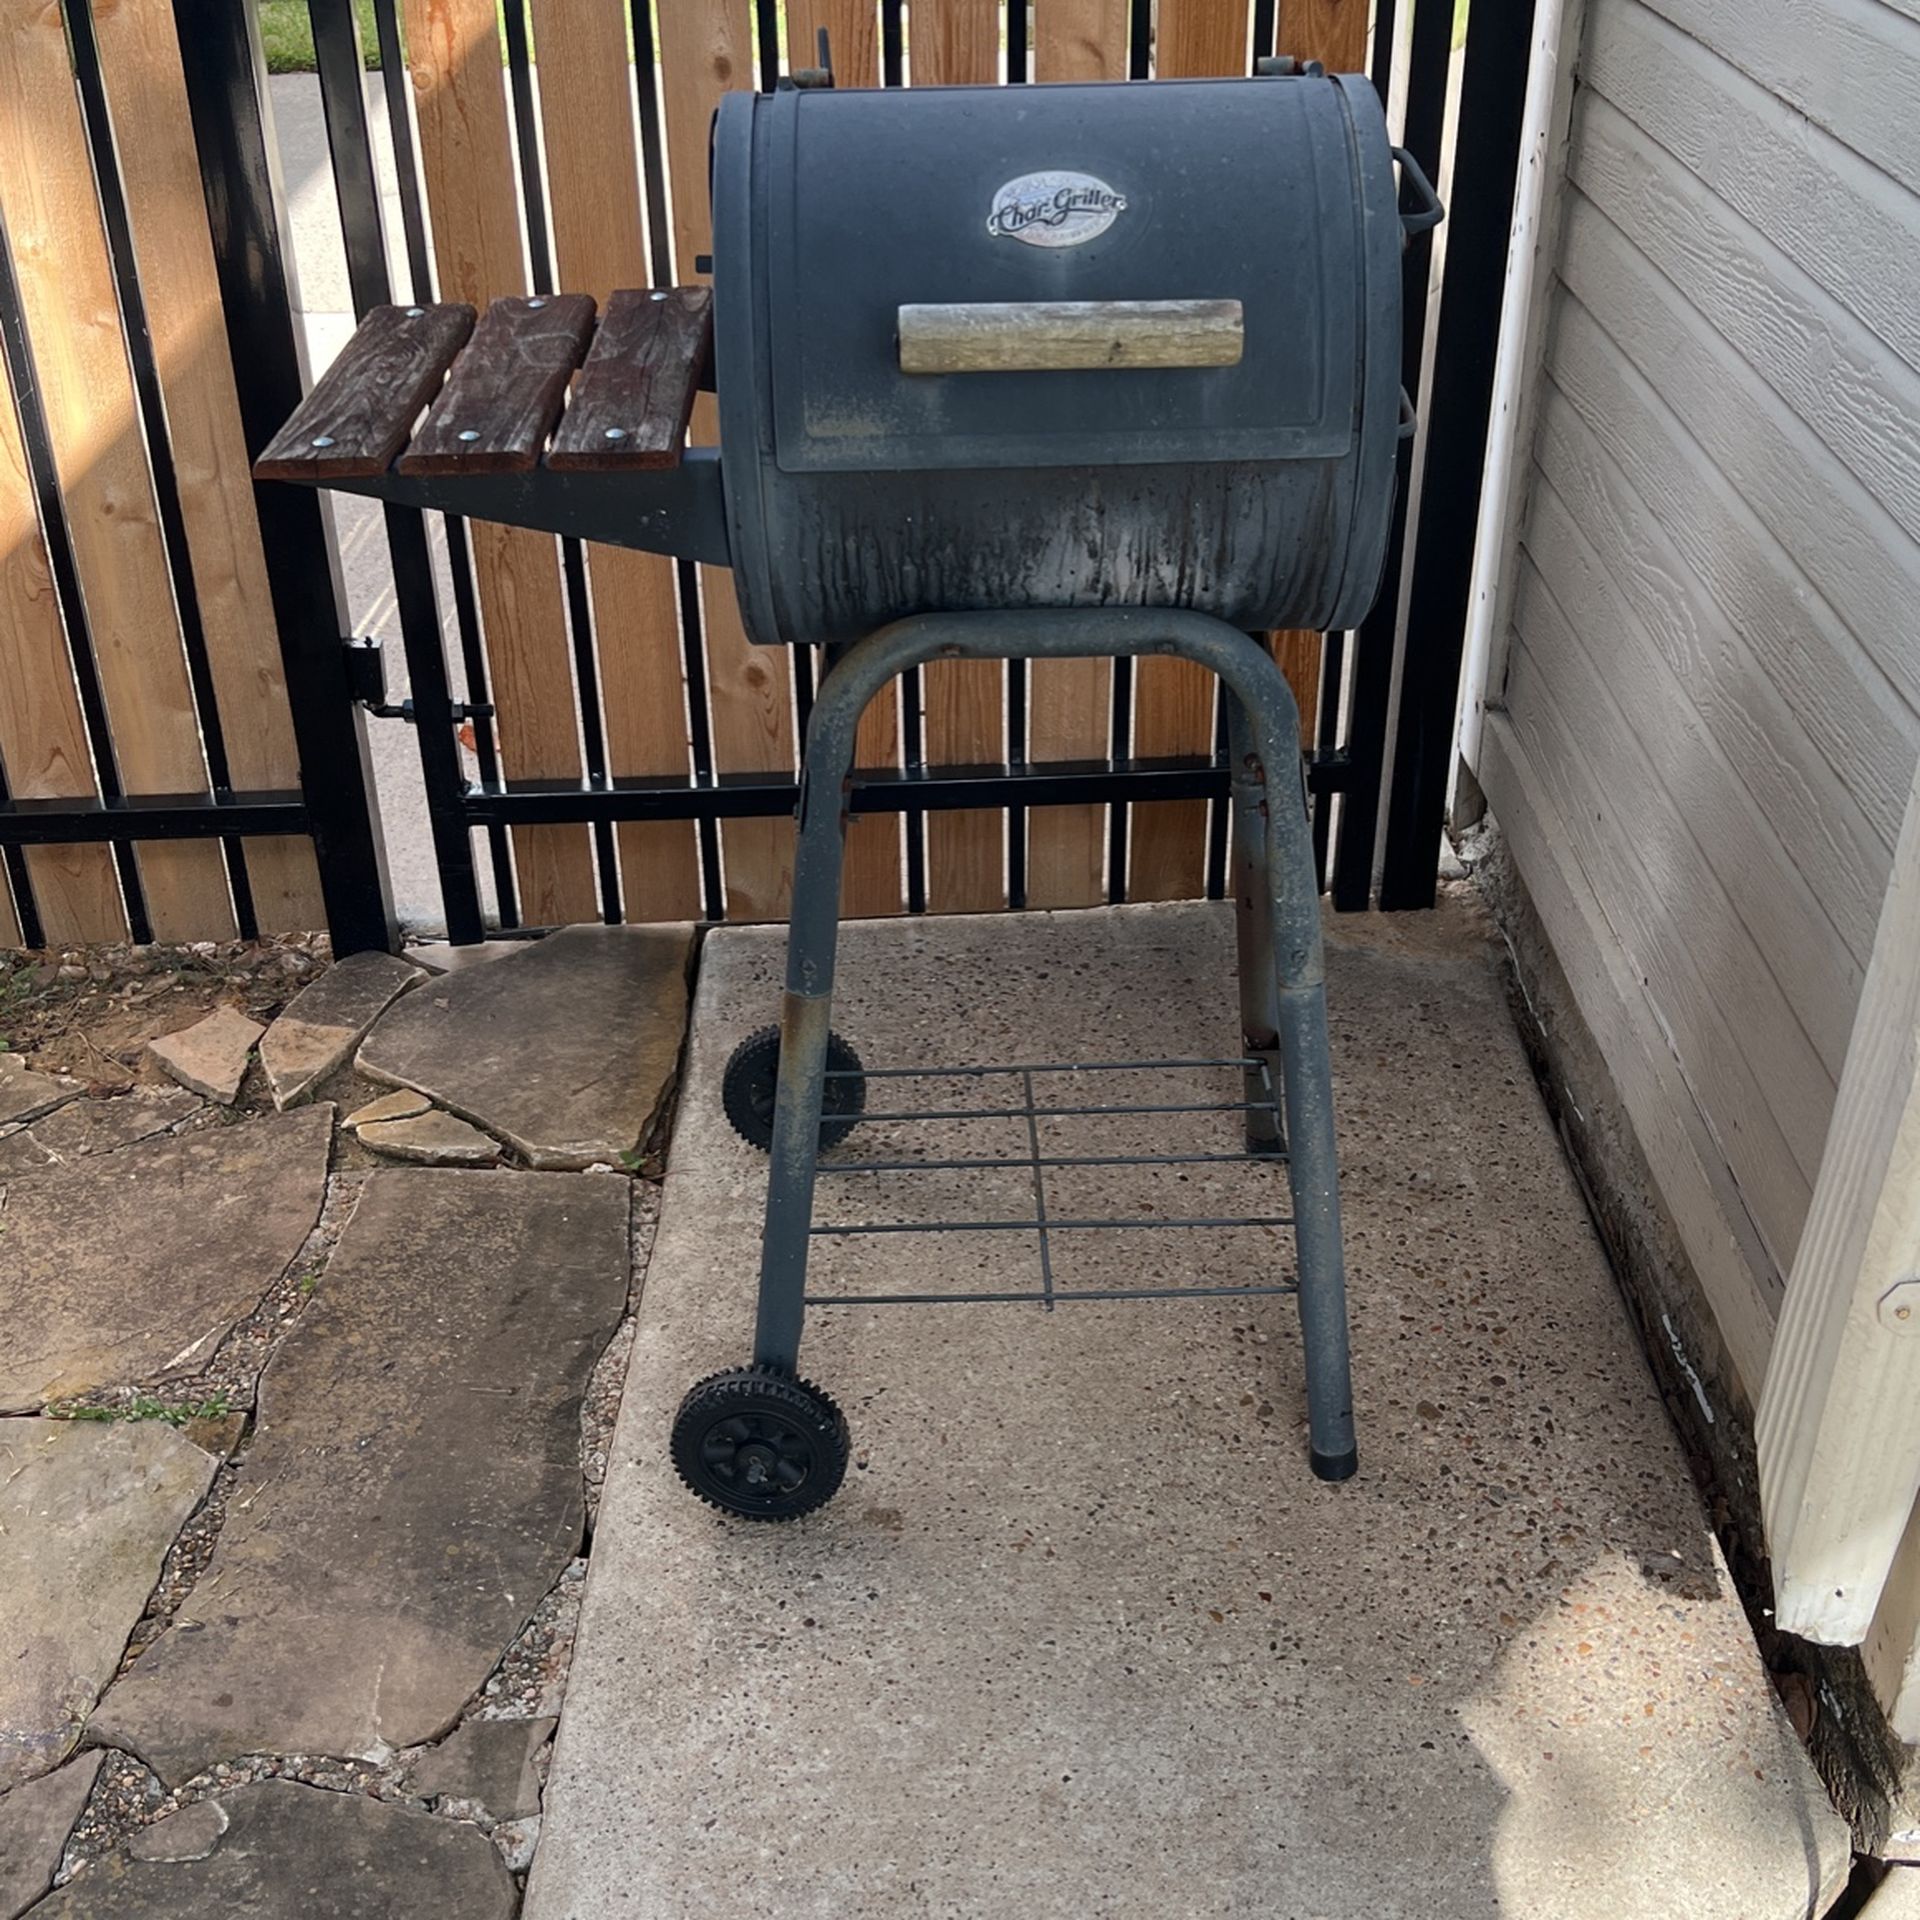 Char griller - BBQ - Grill And Smoker 